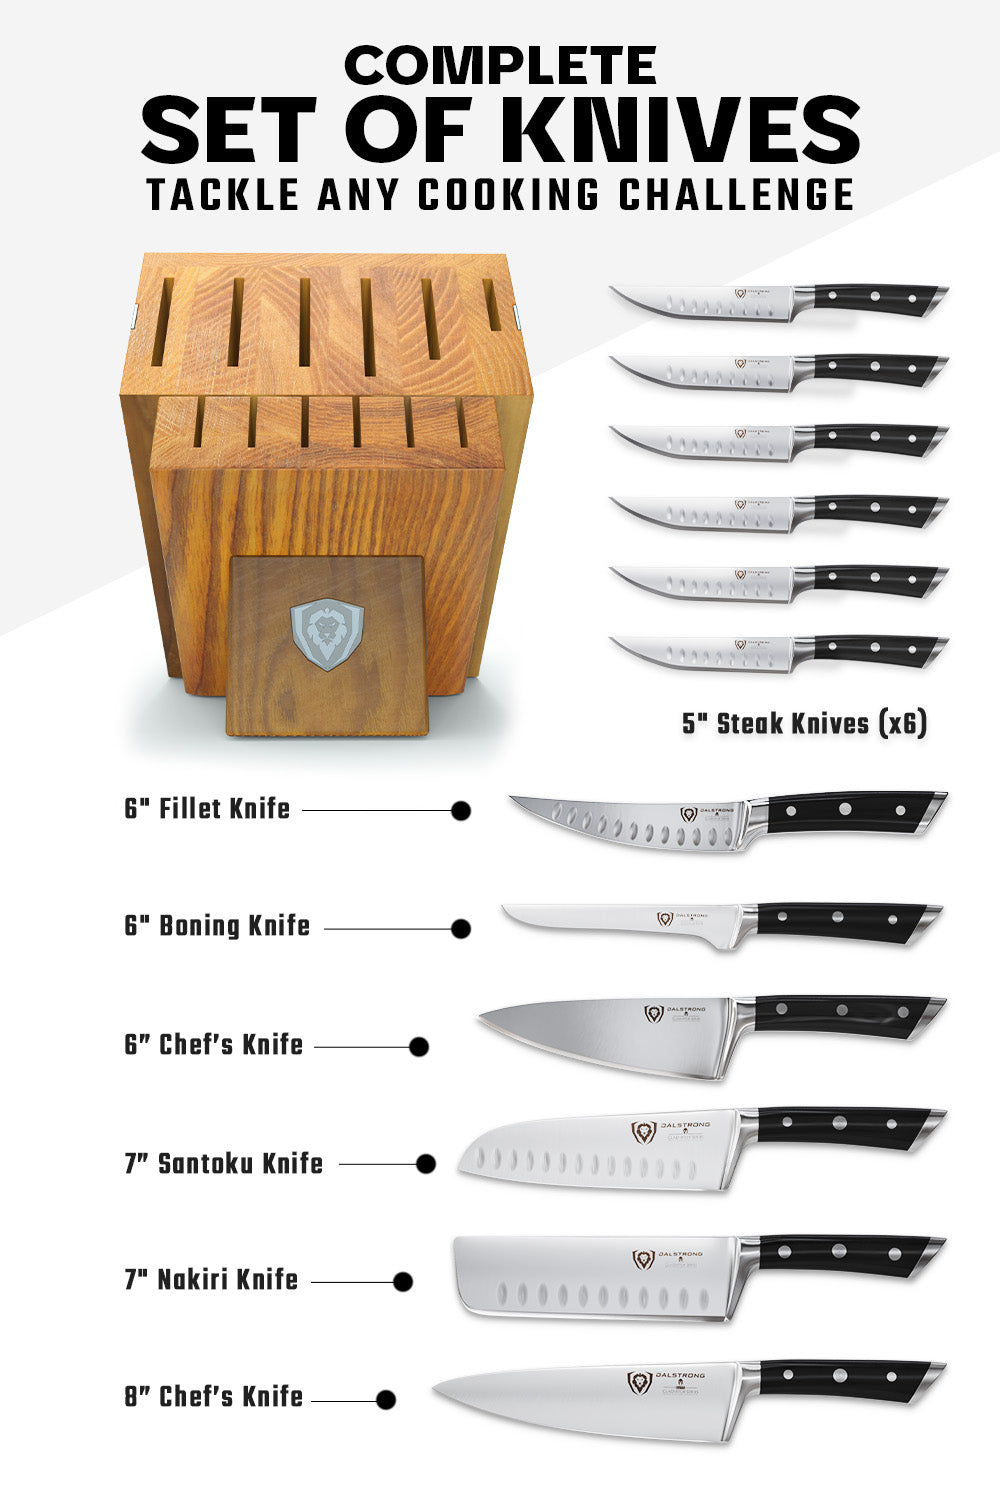 Dalstrong gladiator series 12 piece knife block set with black handles featuring it's complete set of knives and block.